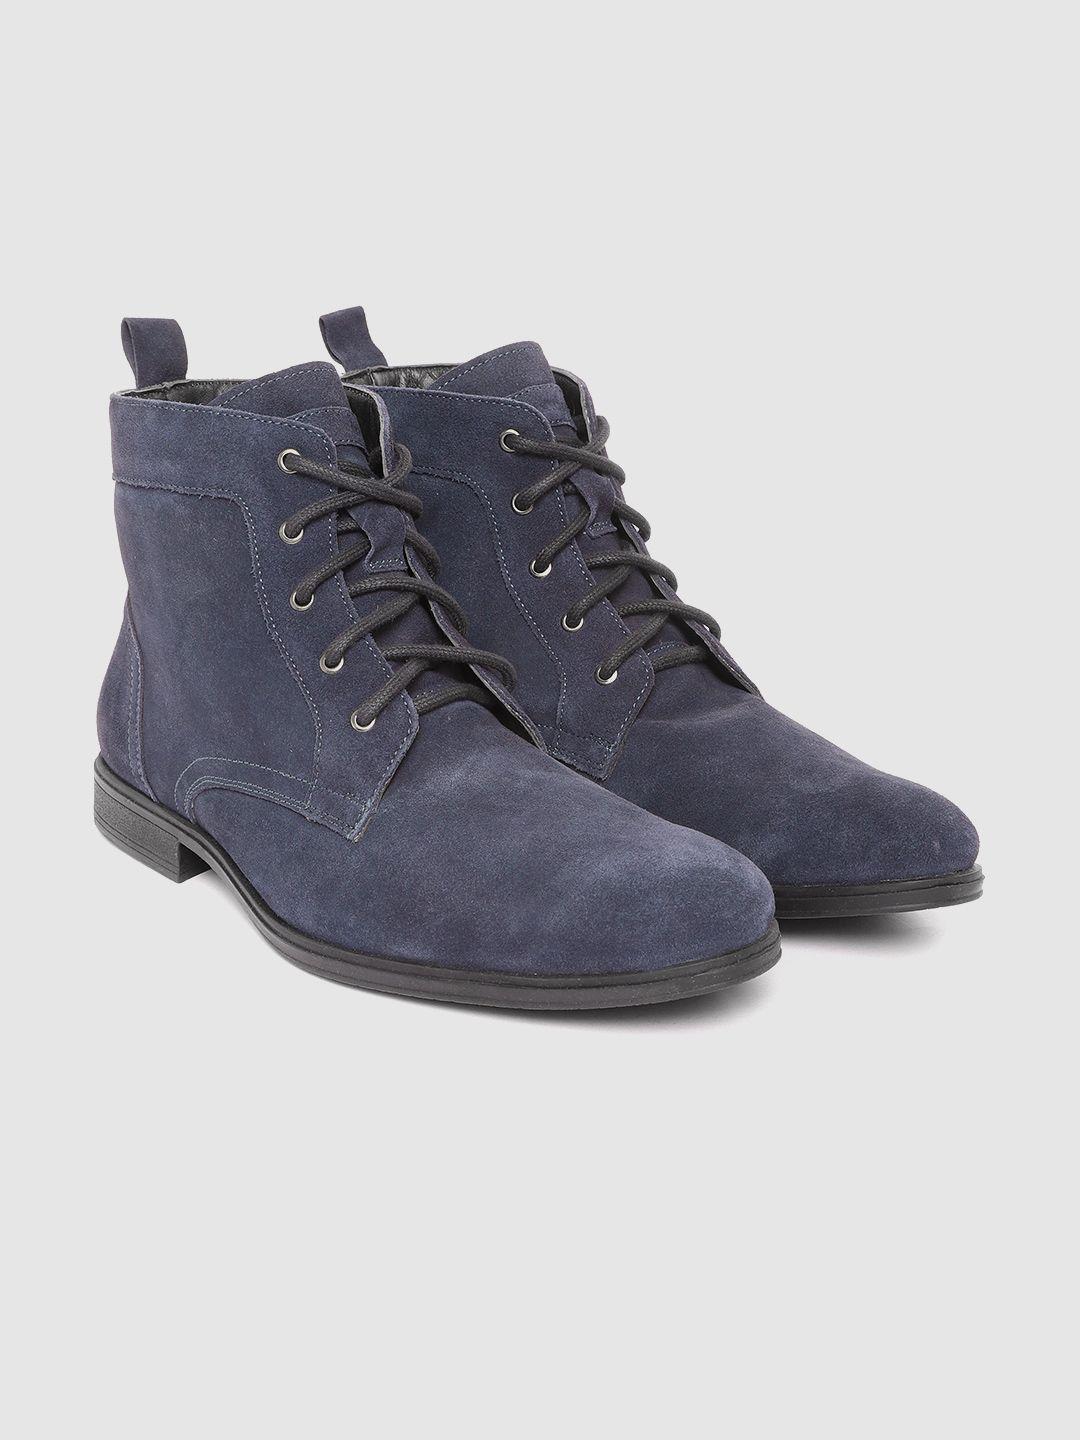 clog london men navy suede leather boots